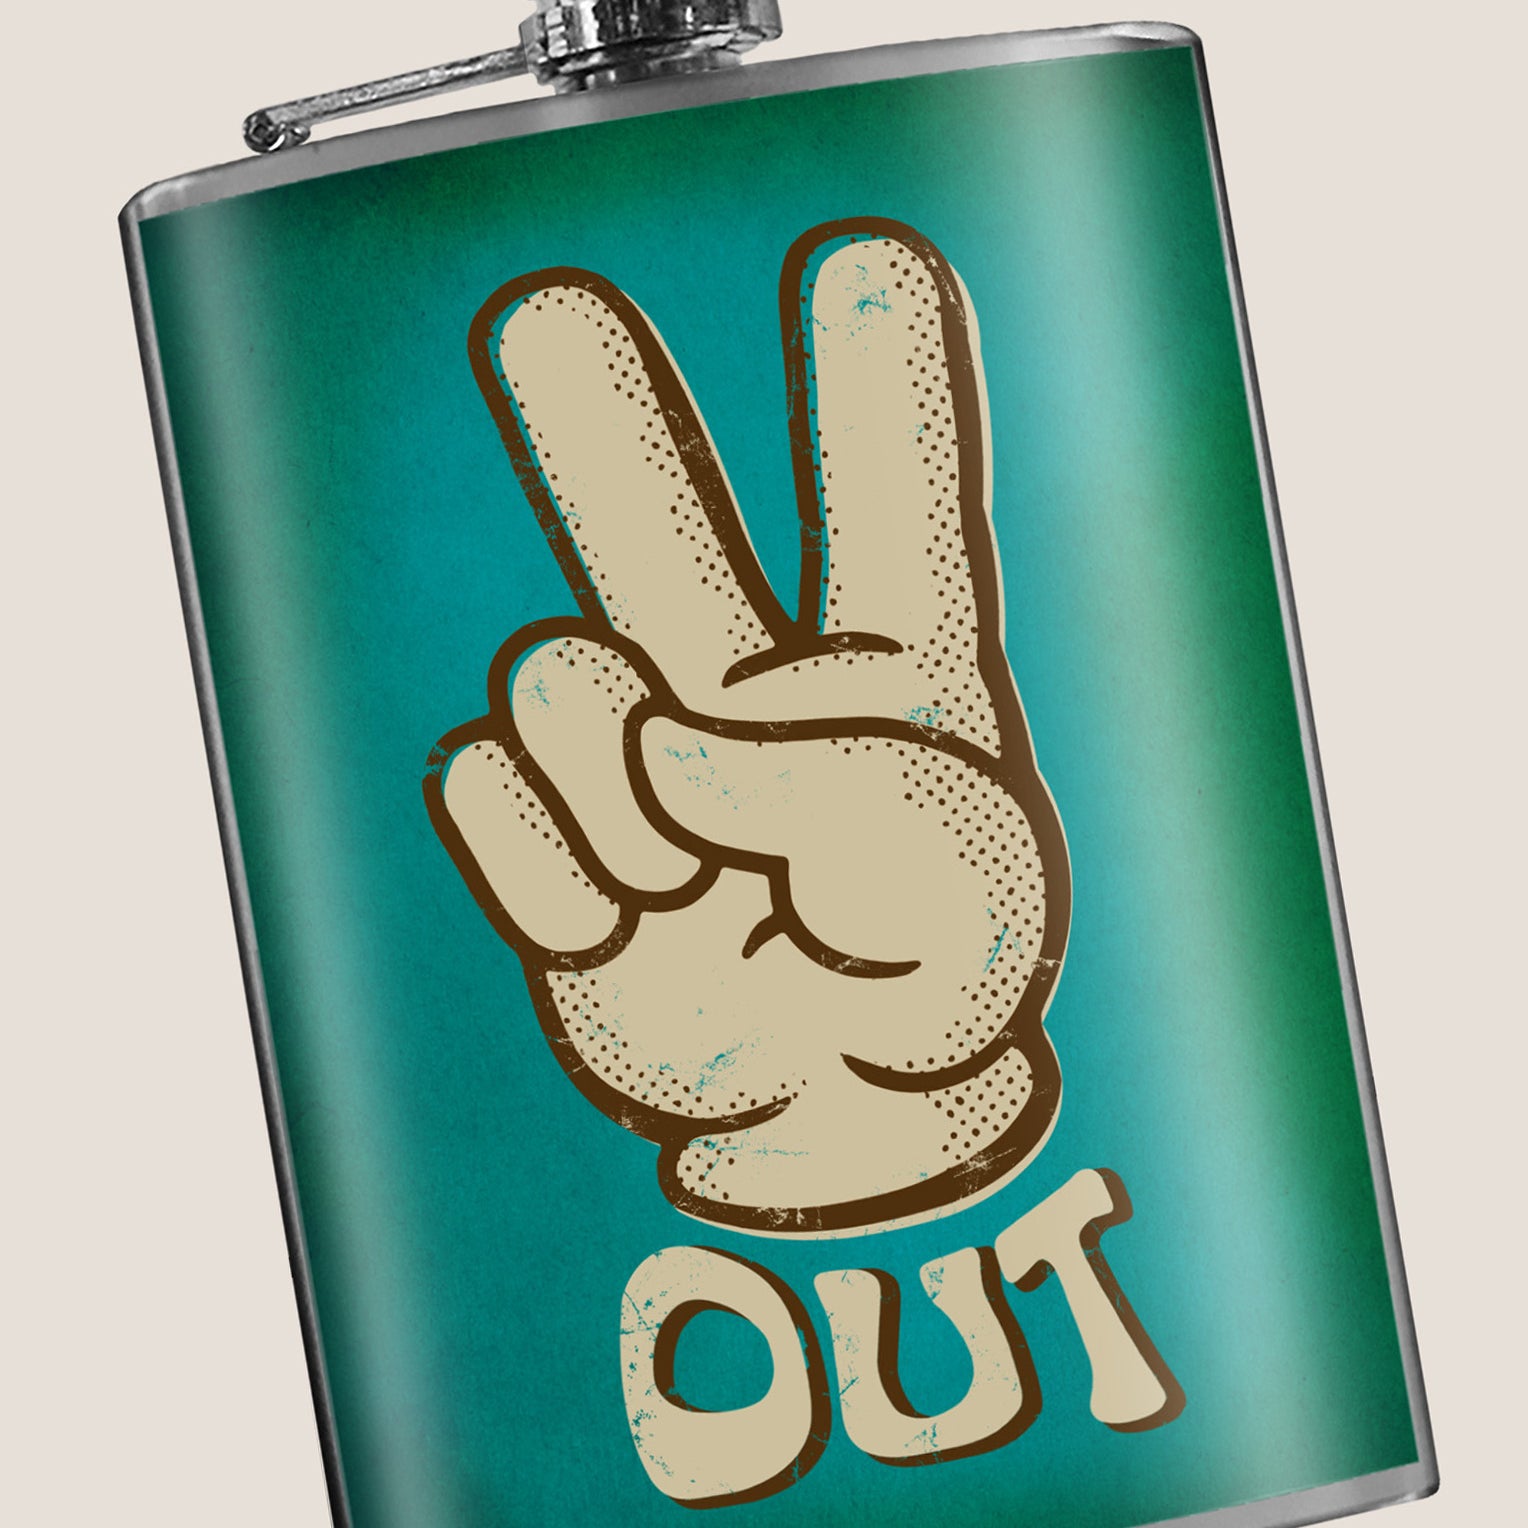 8 oz Hip Flask: Peace Out! Kick off every holiday or party with confidence. Cool stylish stainless steel drinking flask. Designed for durability and retro vintage aesthetic appeal.